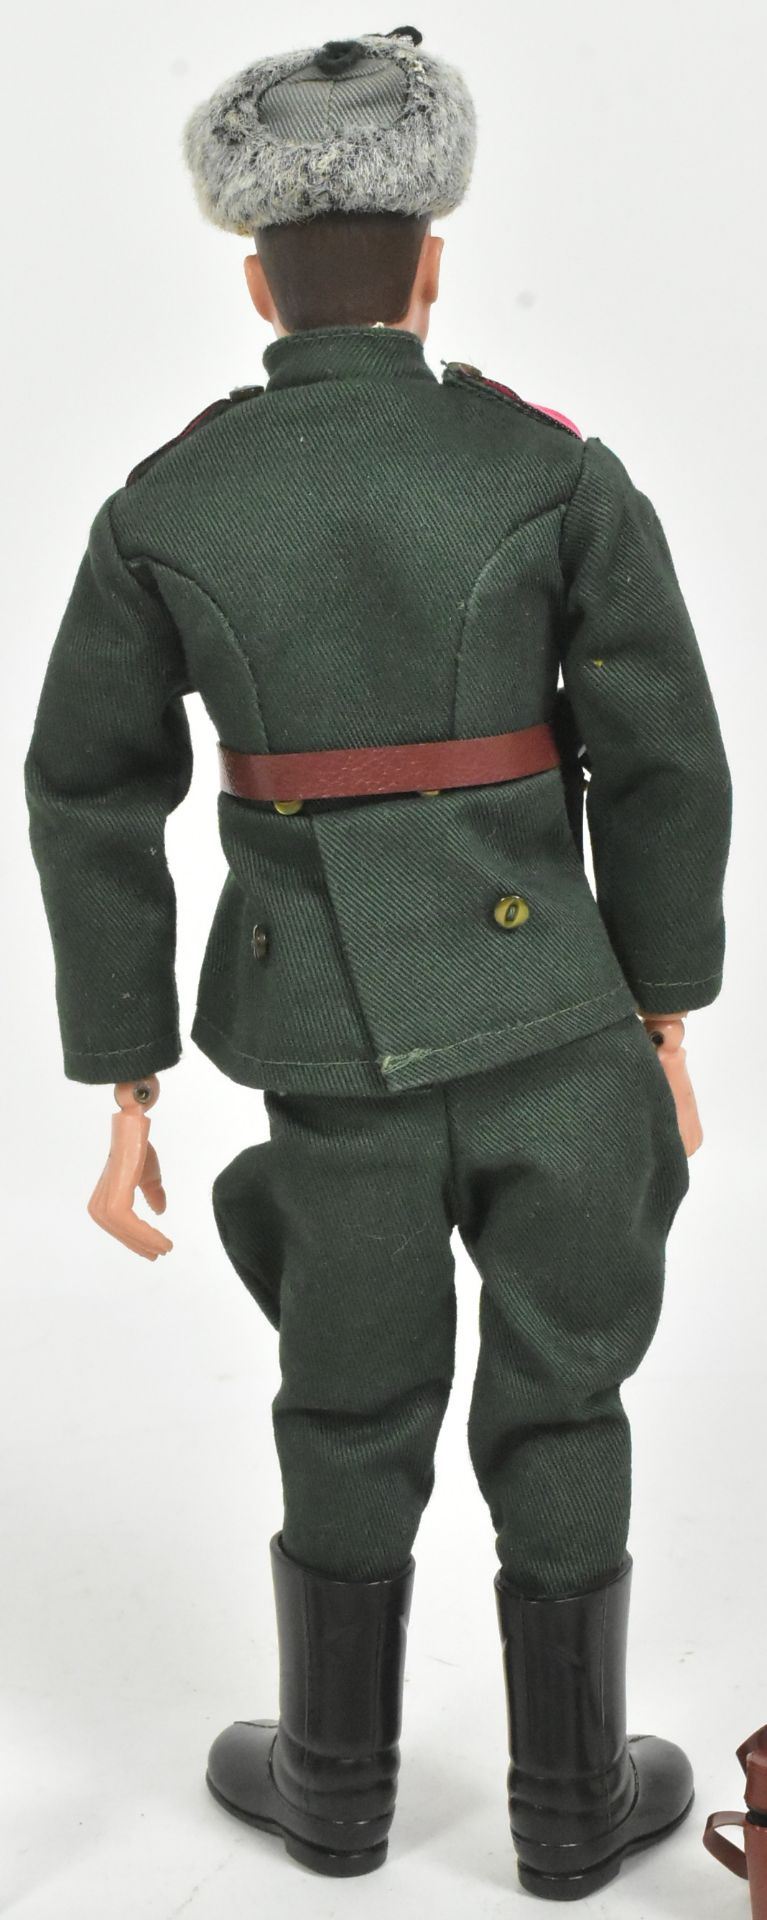 ACTION MAN - PALITOY - VINTAGE RUSSIAN INFANTRYMAN DOLL / FIGURE - Image 4 of 5